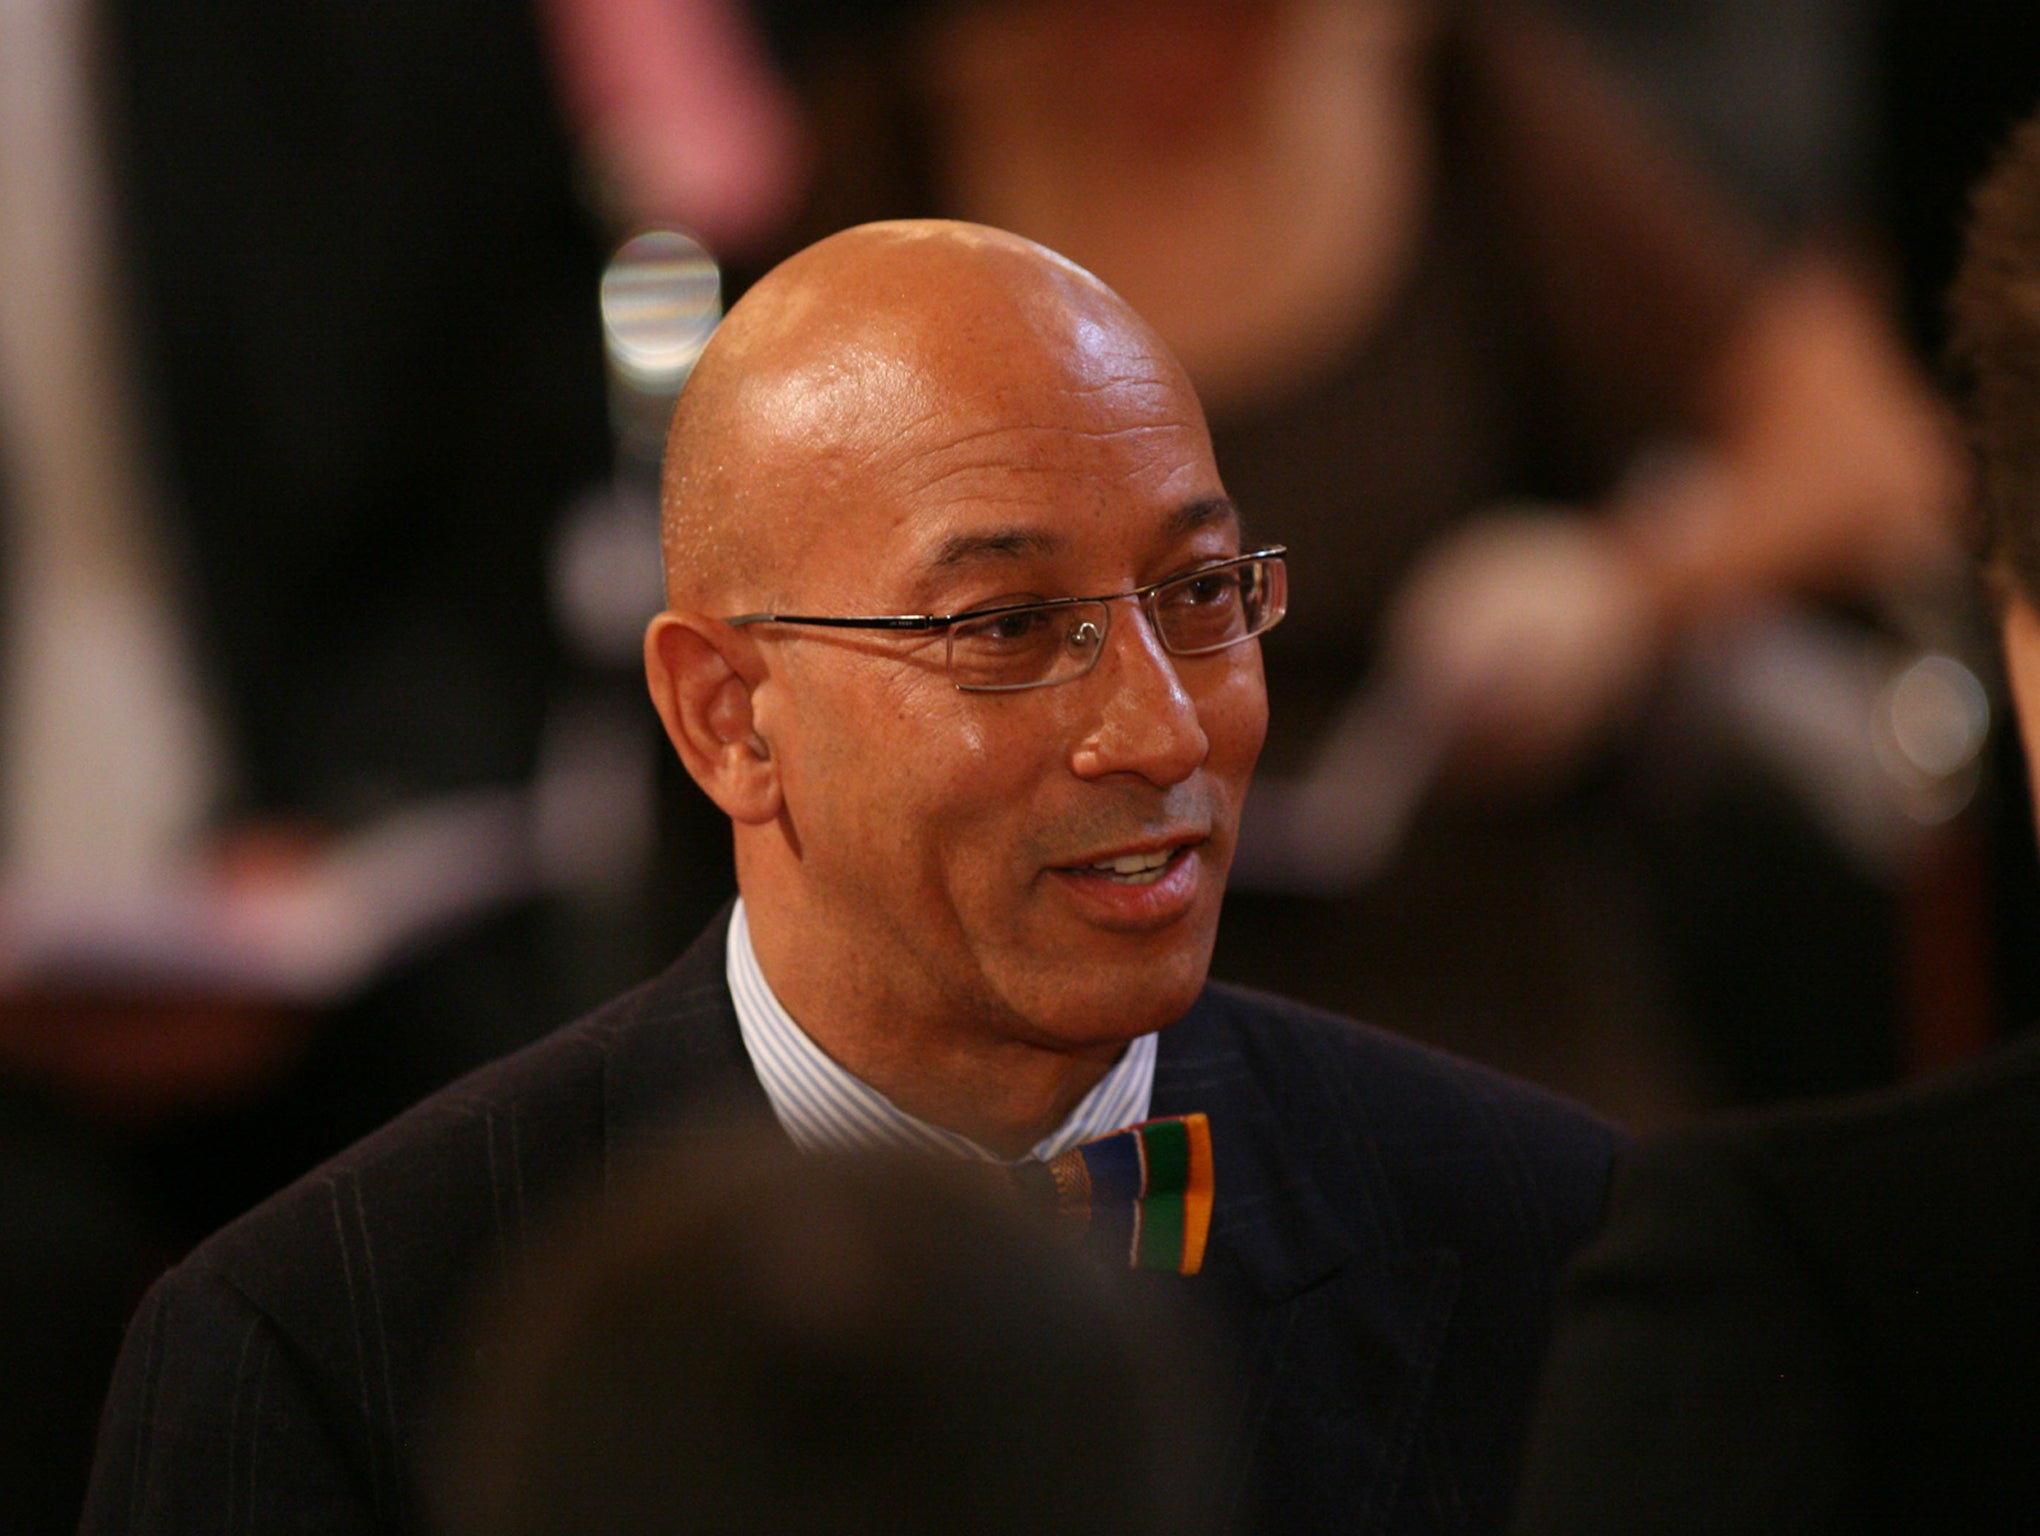 Peter Herbert had criticised the decision to ban former Tower Hamlets mayor Lutfur Rahman from standing for office